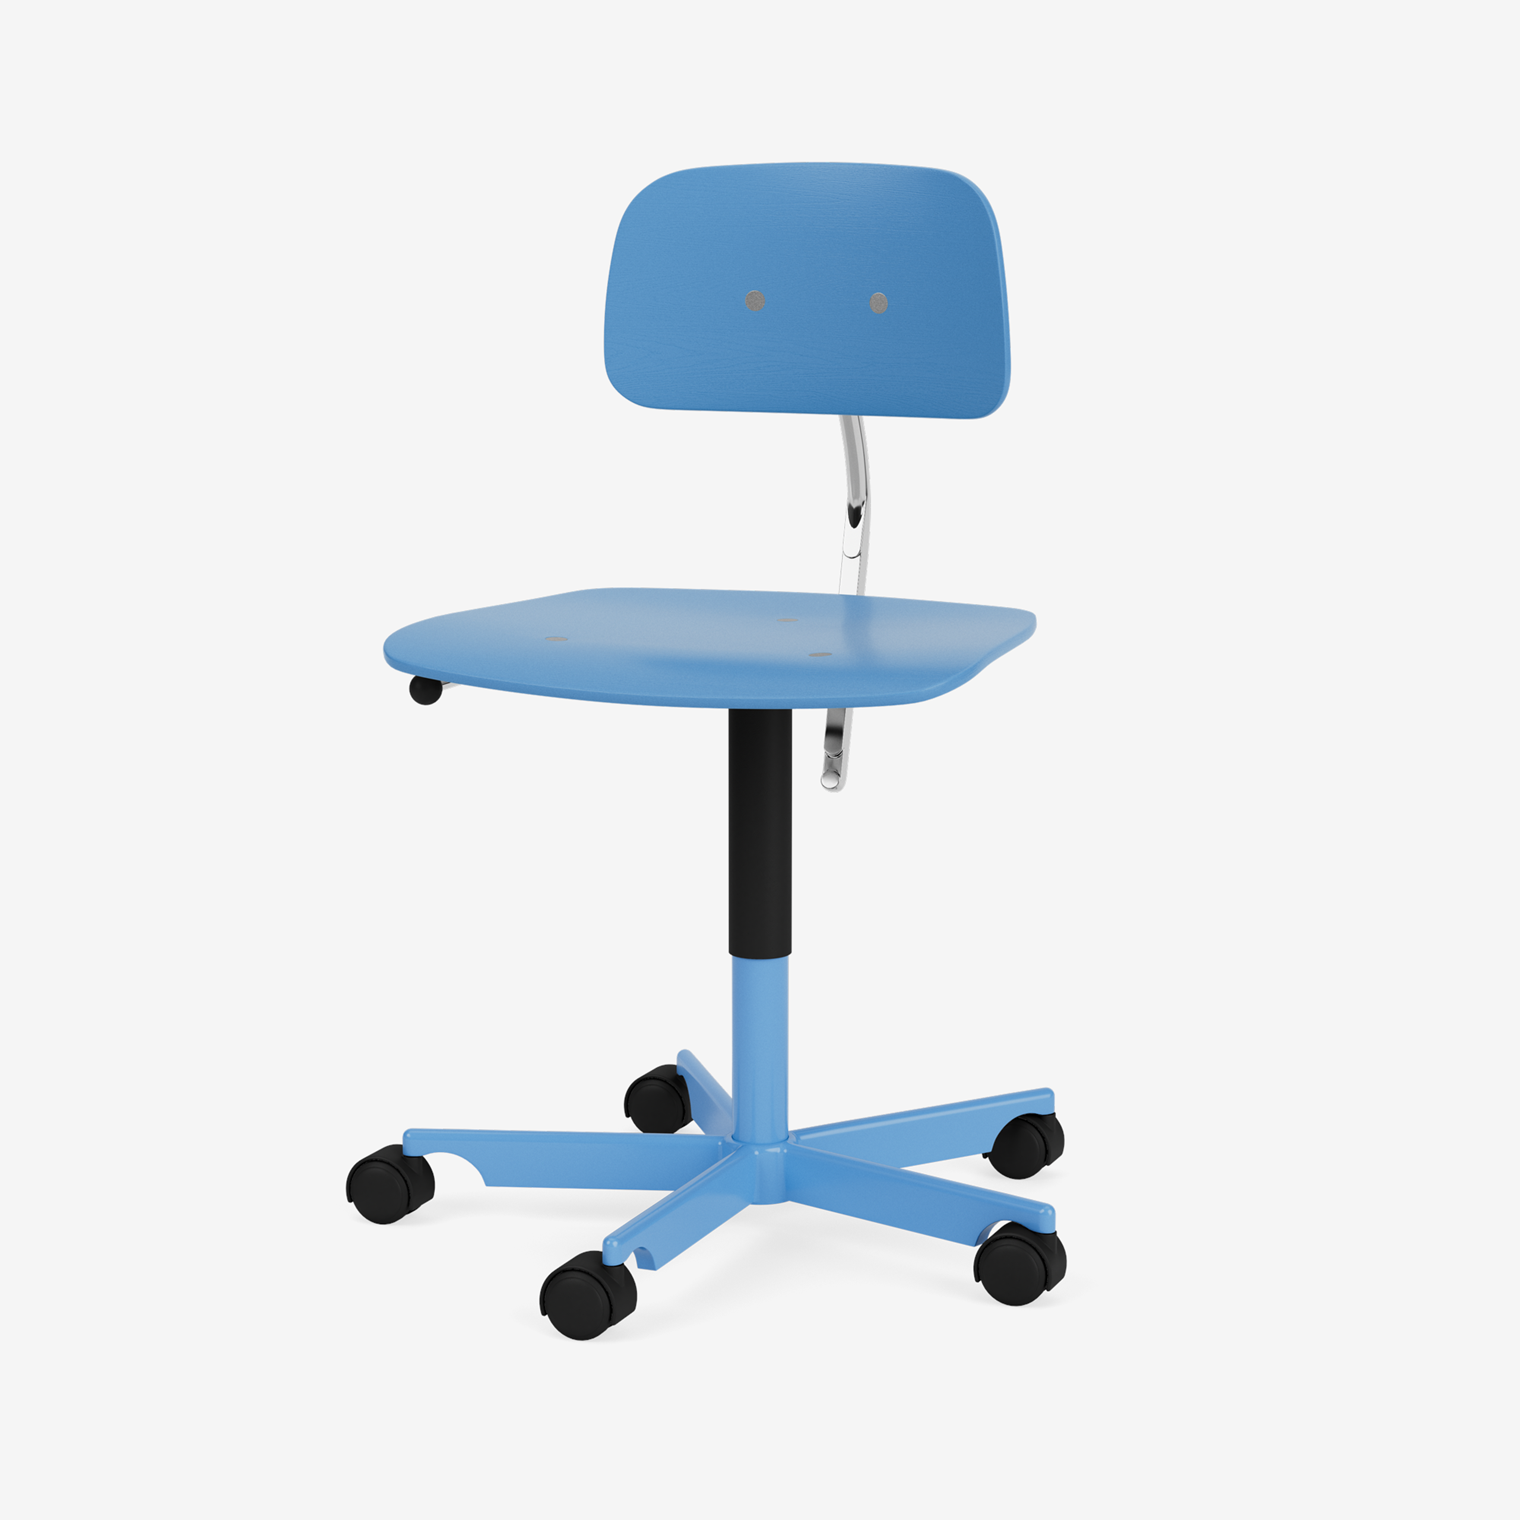 Kevi 2533 office chair